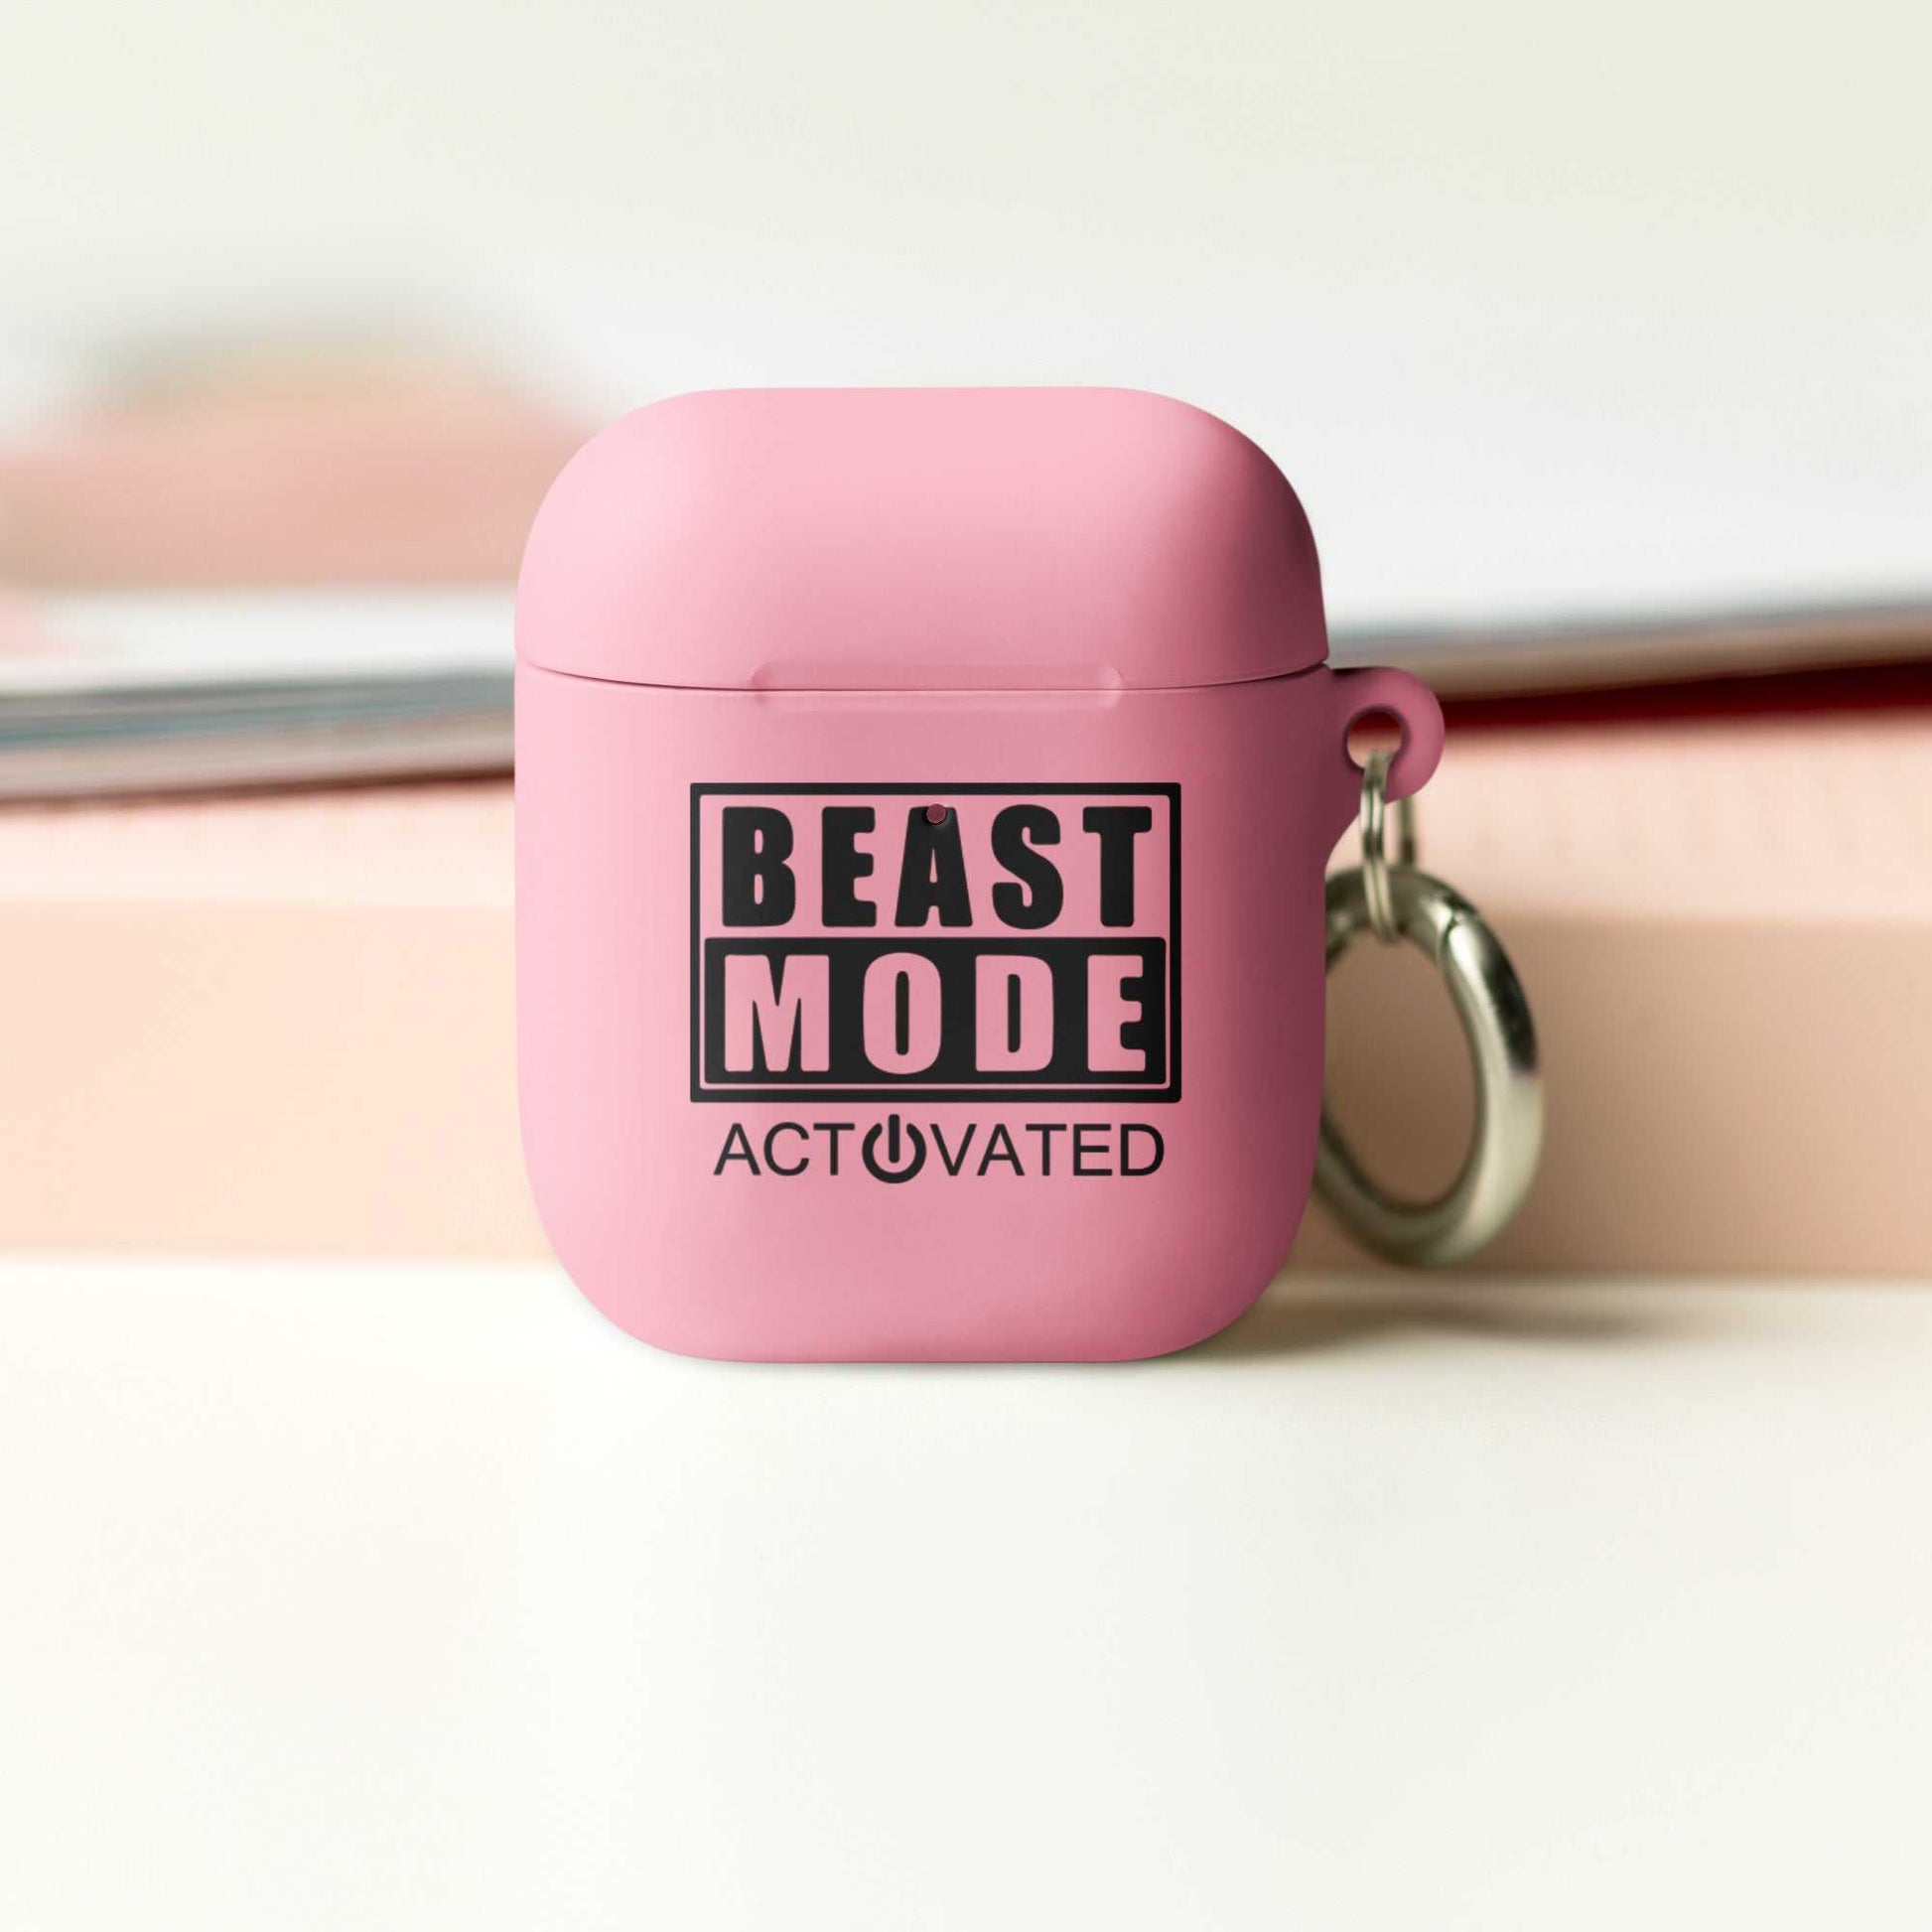 Beast Mode AirPods case Motivation on the Go!! Good Vibes Daily Lab 22